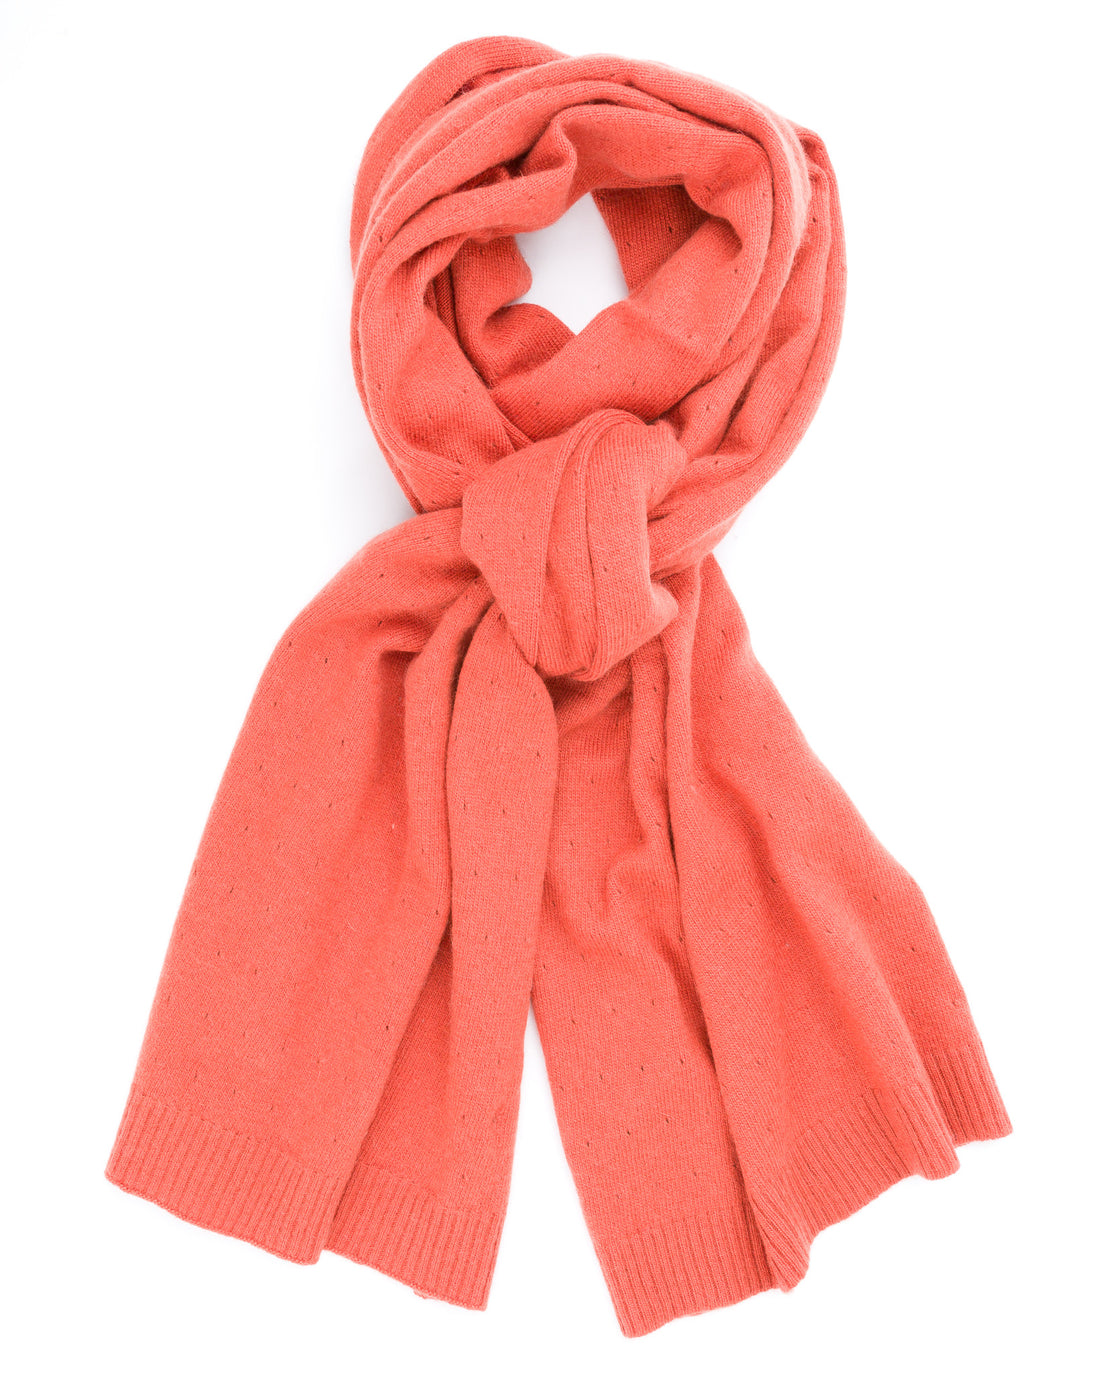 ACCESSORIES - Scarf